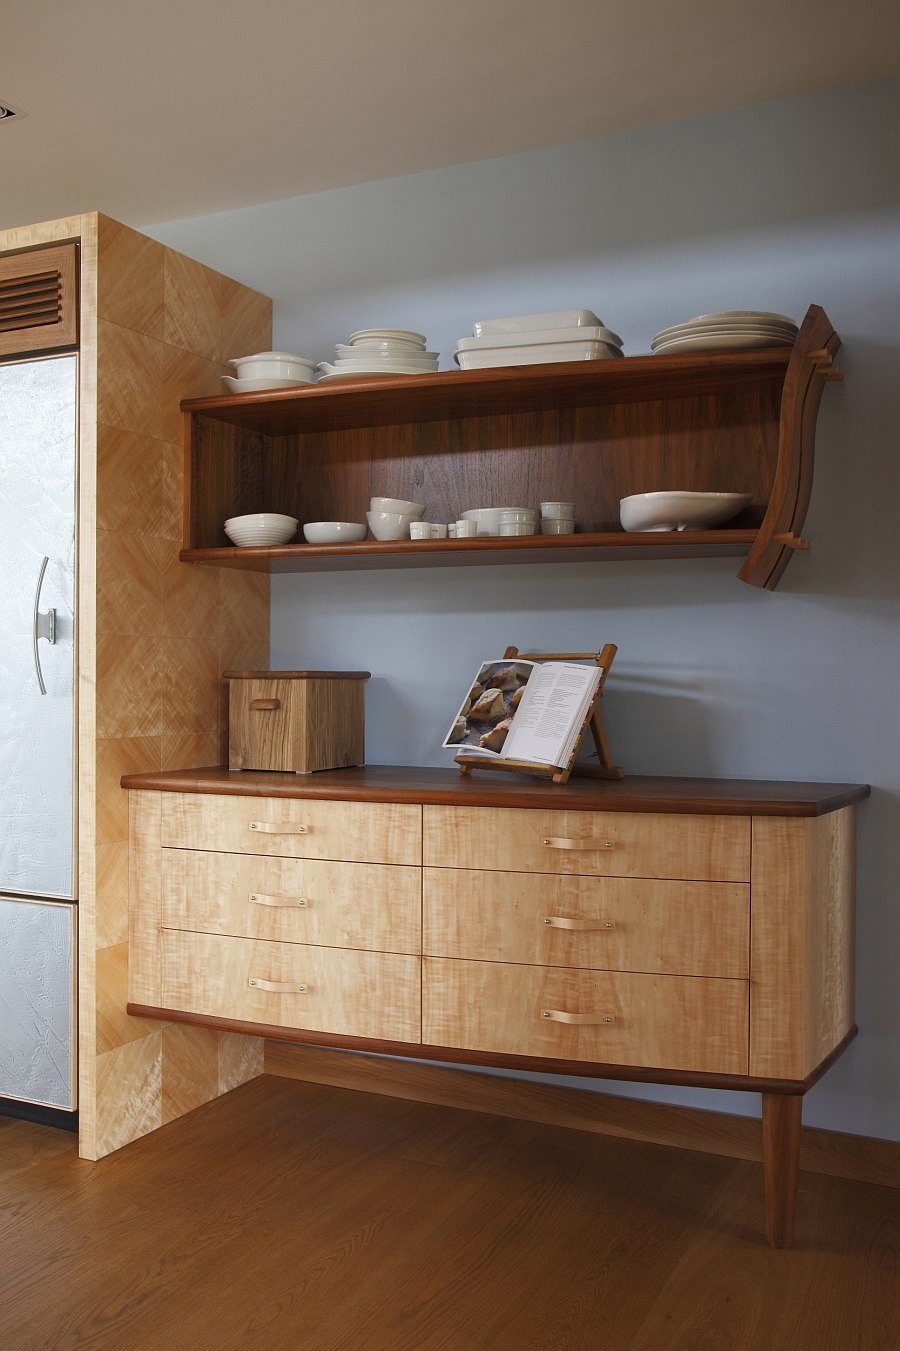 Traditional dresser next to the fridge gives the space a warm, cozy appeal